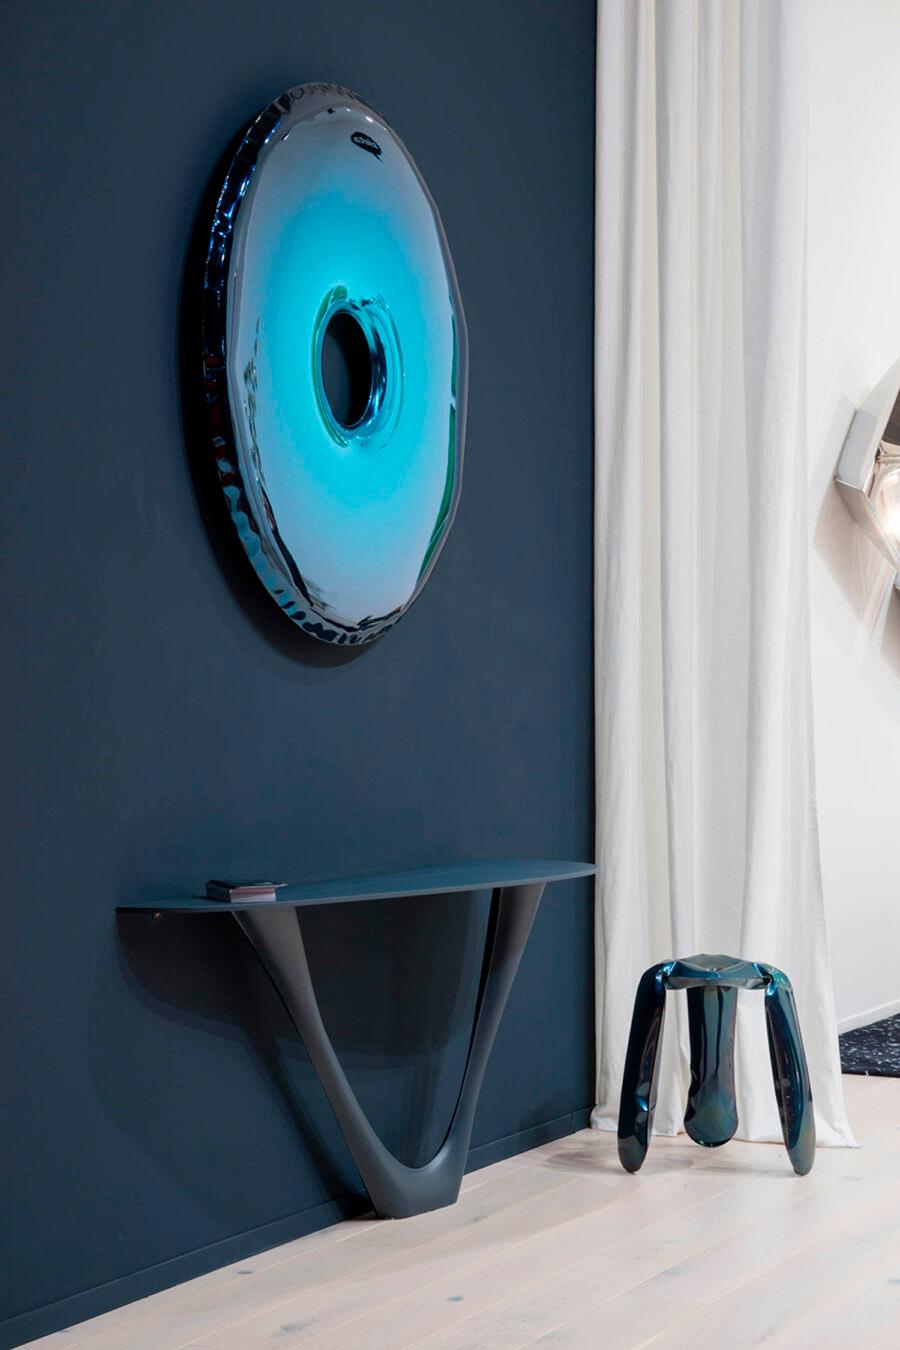 Rondo mirror 'Deep Space Blue' by Zieta Prozessdesign
Gradient collection - Deep Space Blue

Stainless steel
Measures: D 95 x 6 cm.

Several sizes available: 
Diameter: 75 cm / 120 cm / 150 cm



Zieta is best known for his collection of